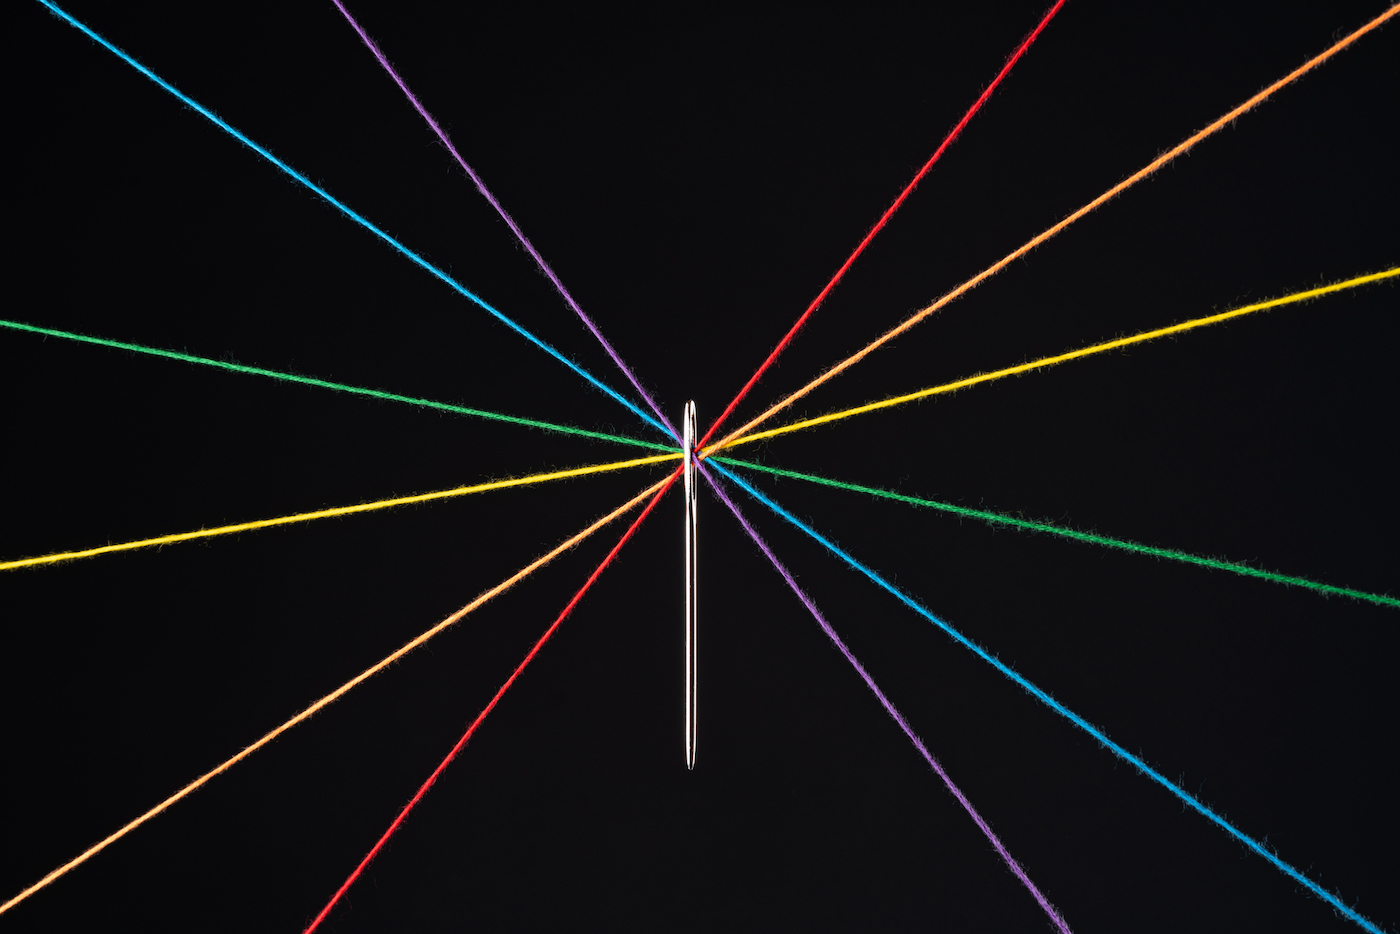 Rainbow colored threads through the eye of the needle on a black background.